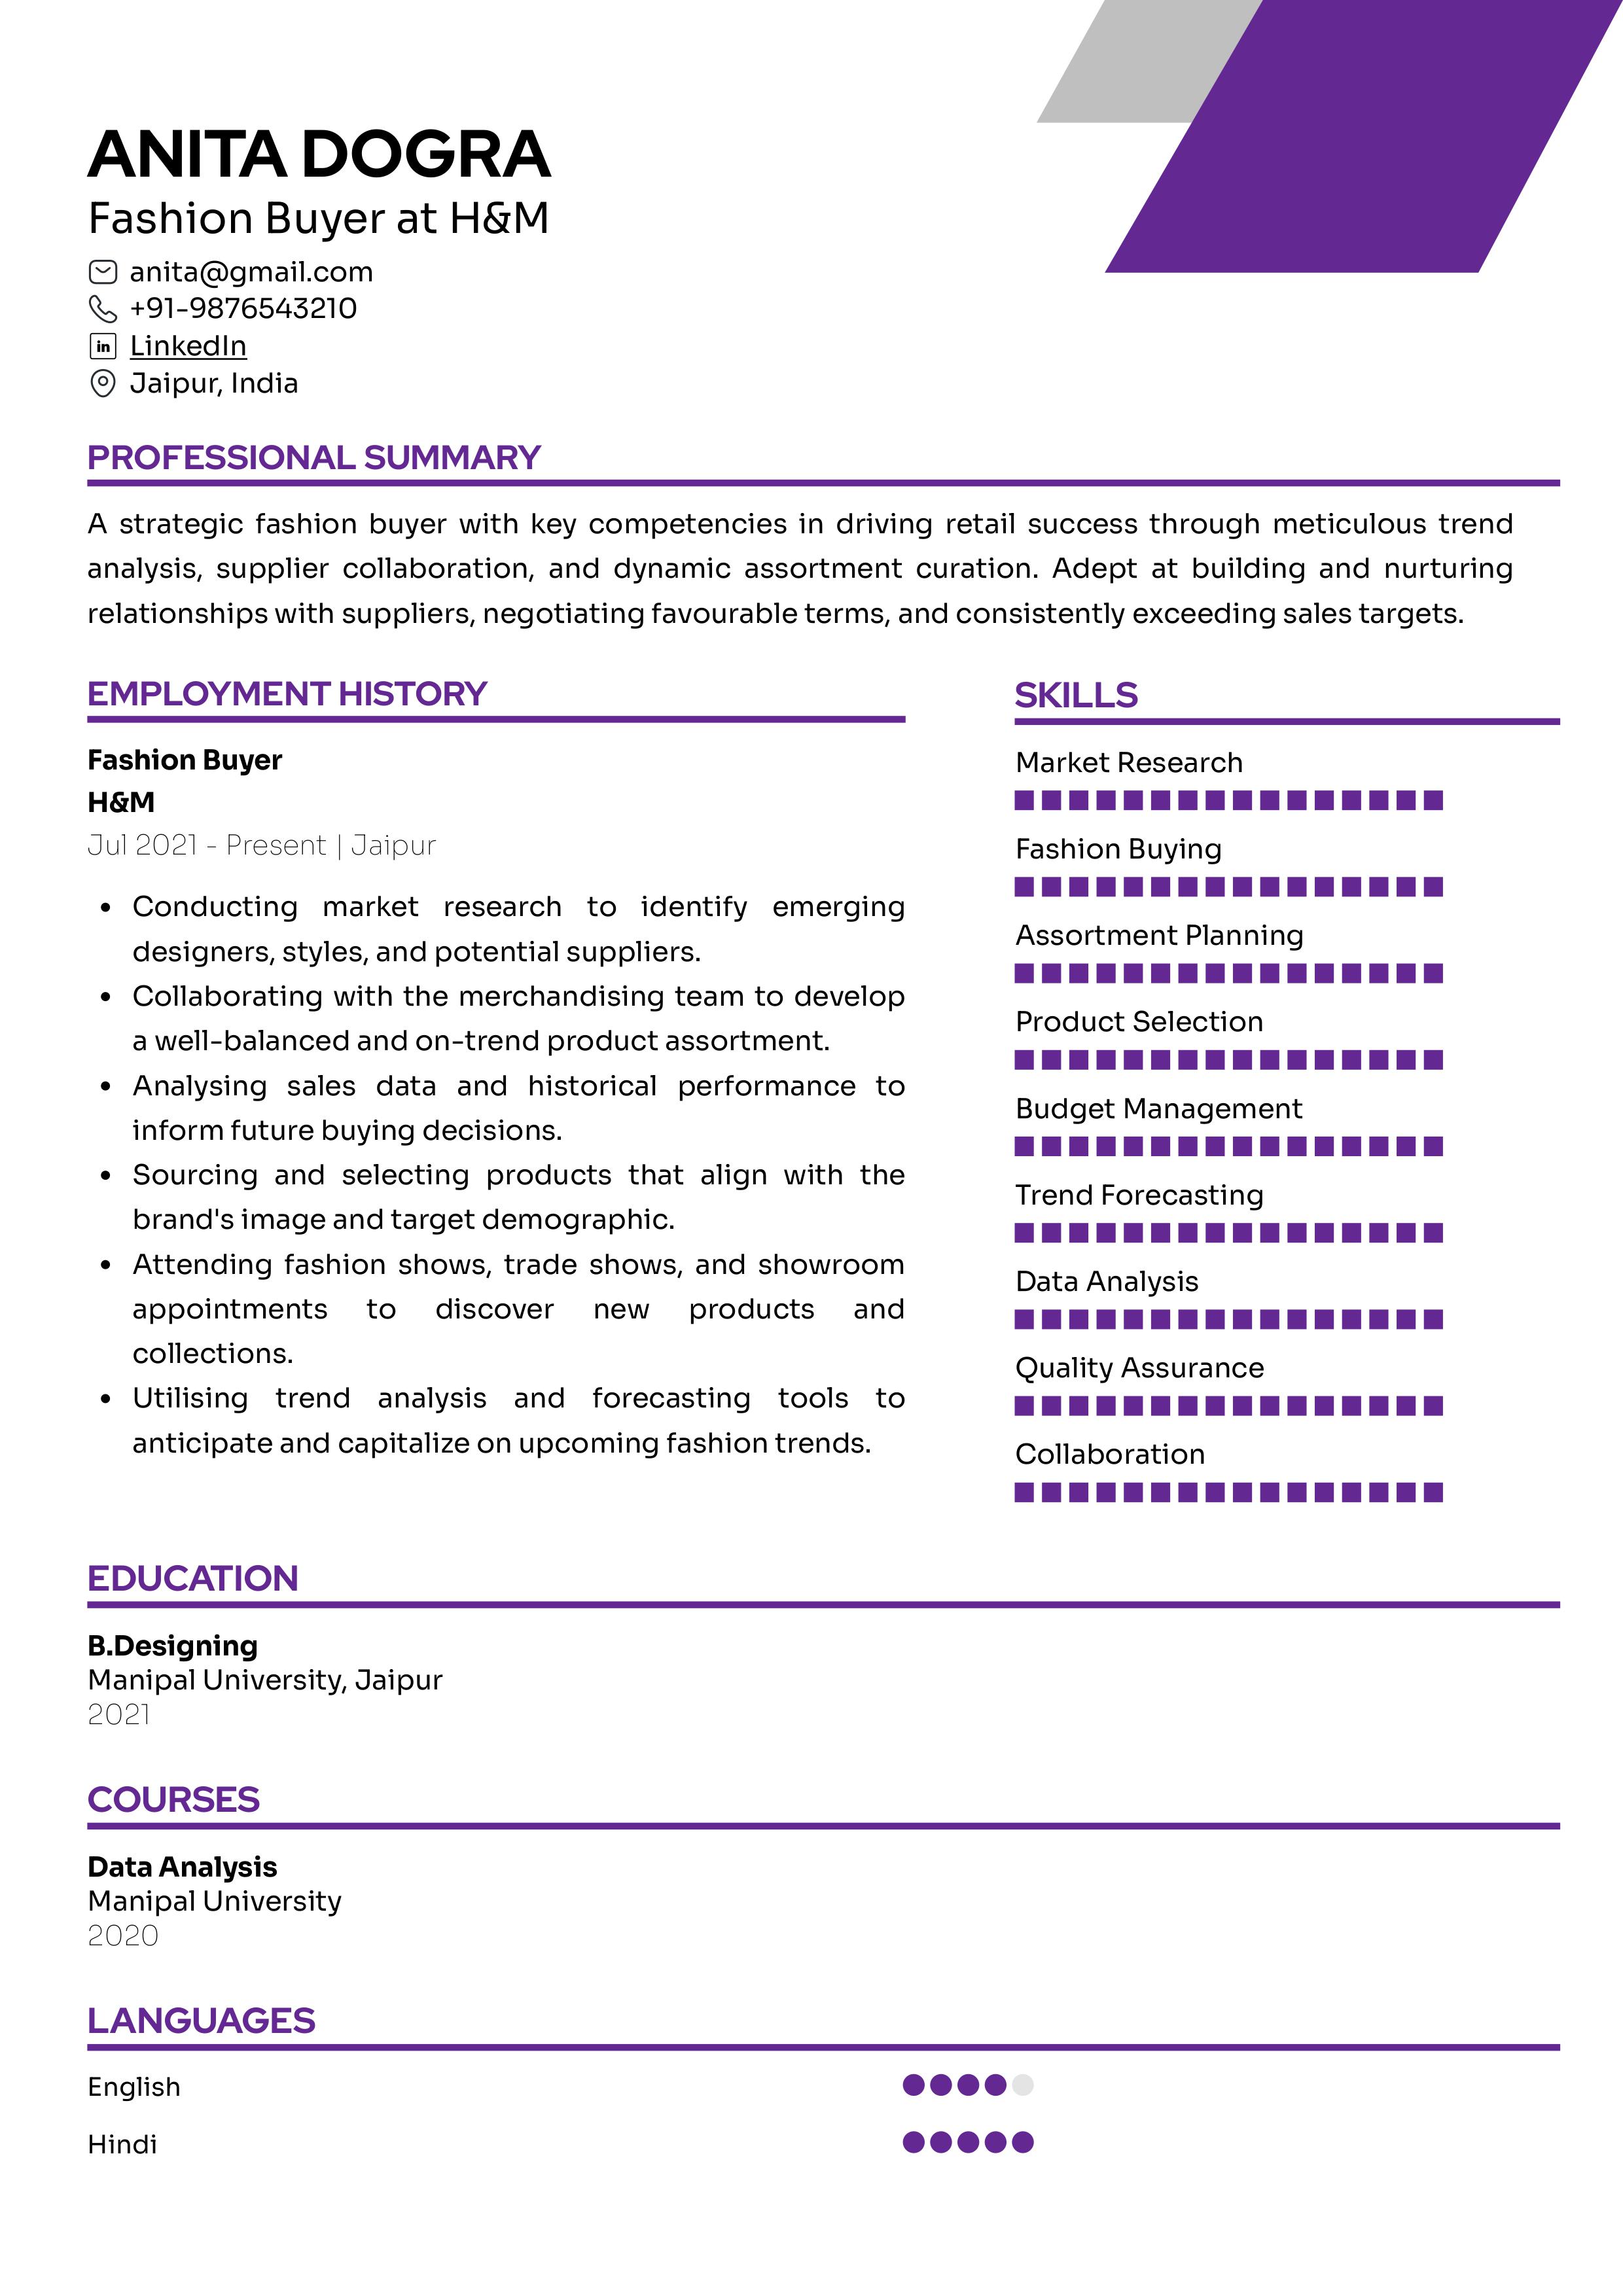 Sample Resume of Fashion Buyer | Free Resume Templates & Samples on Resumod.co